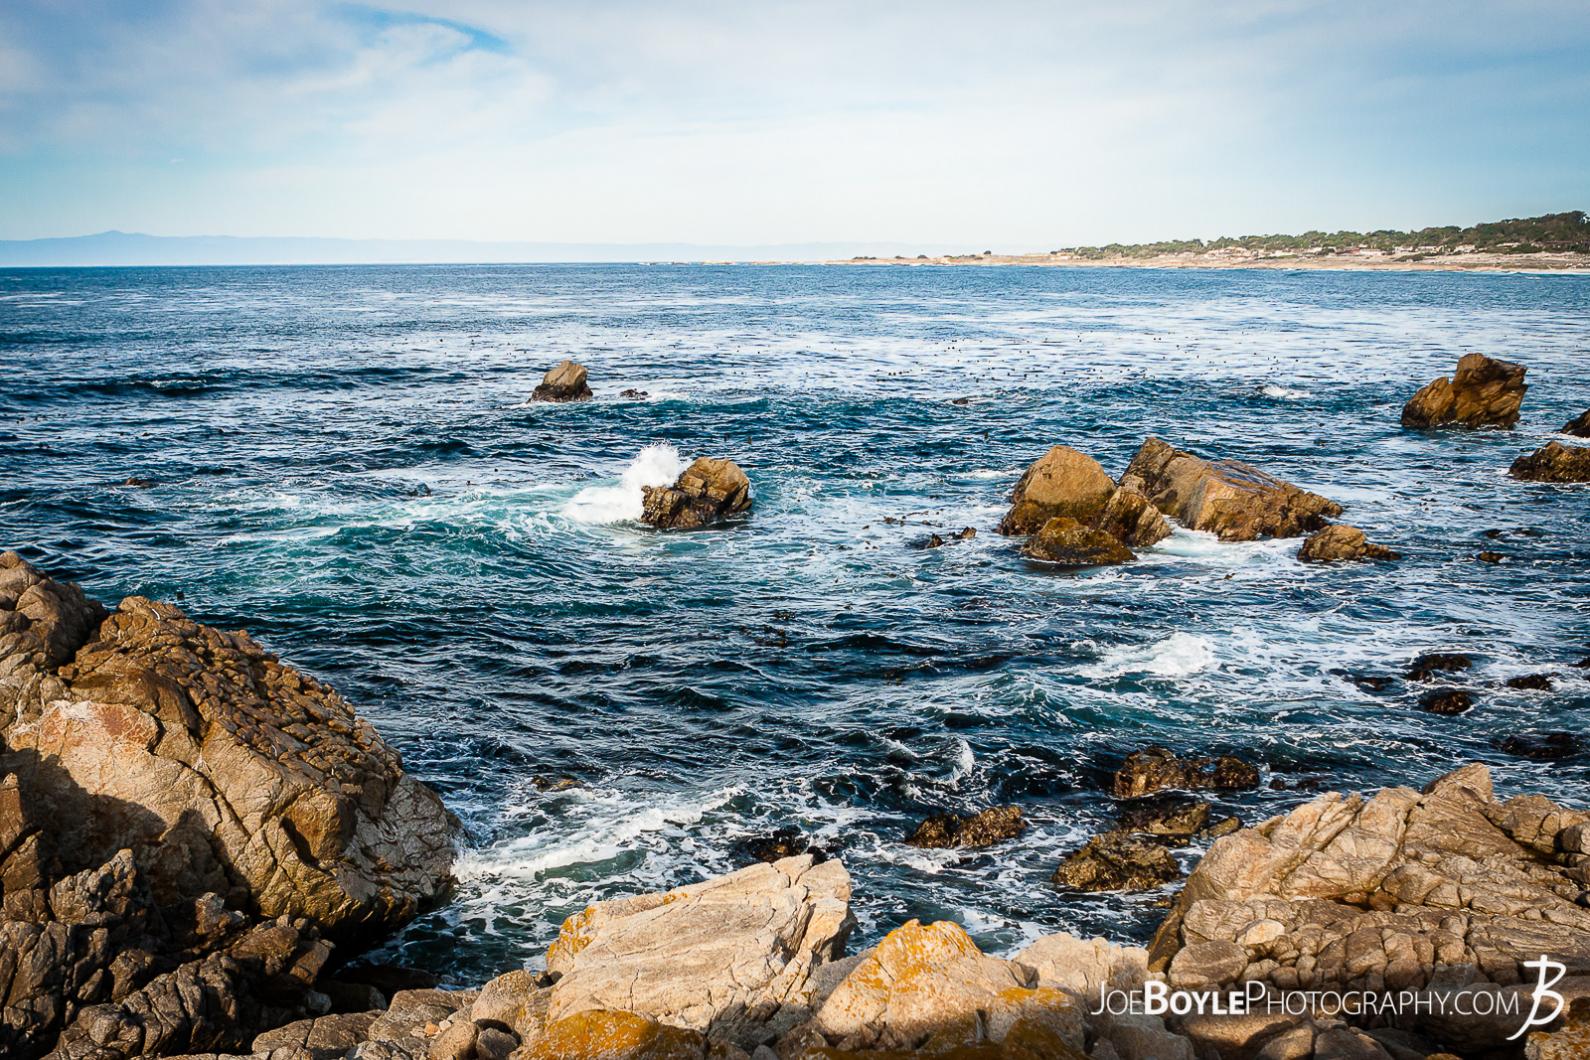 While visiting a friend in California we took the 17 Mile Drive to Carmel by the Sea. It was a great drive with absolutely awesome and stunning views!